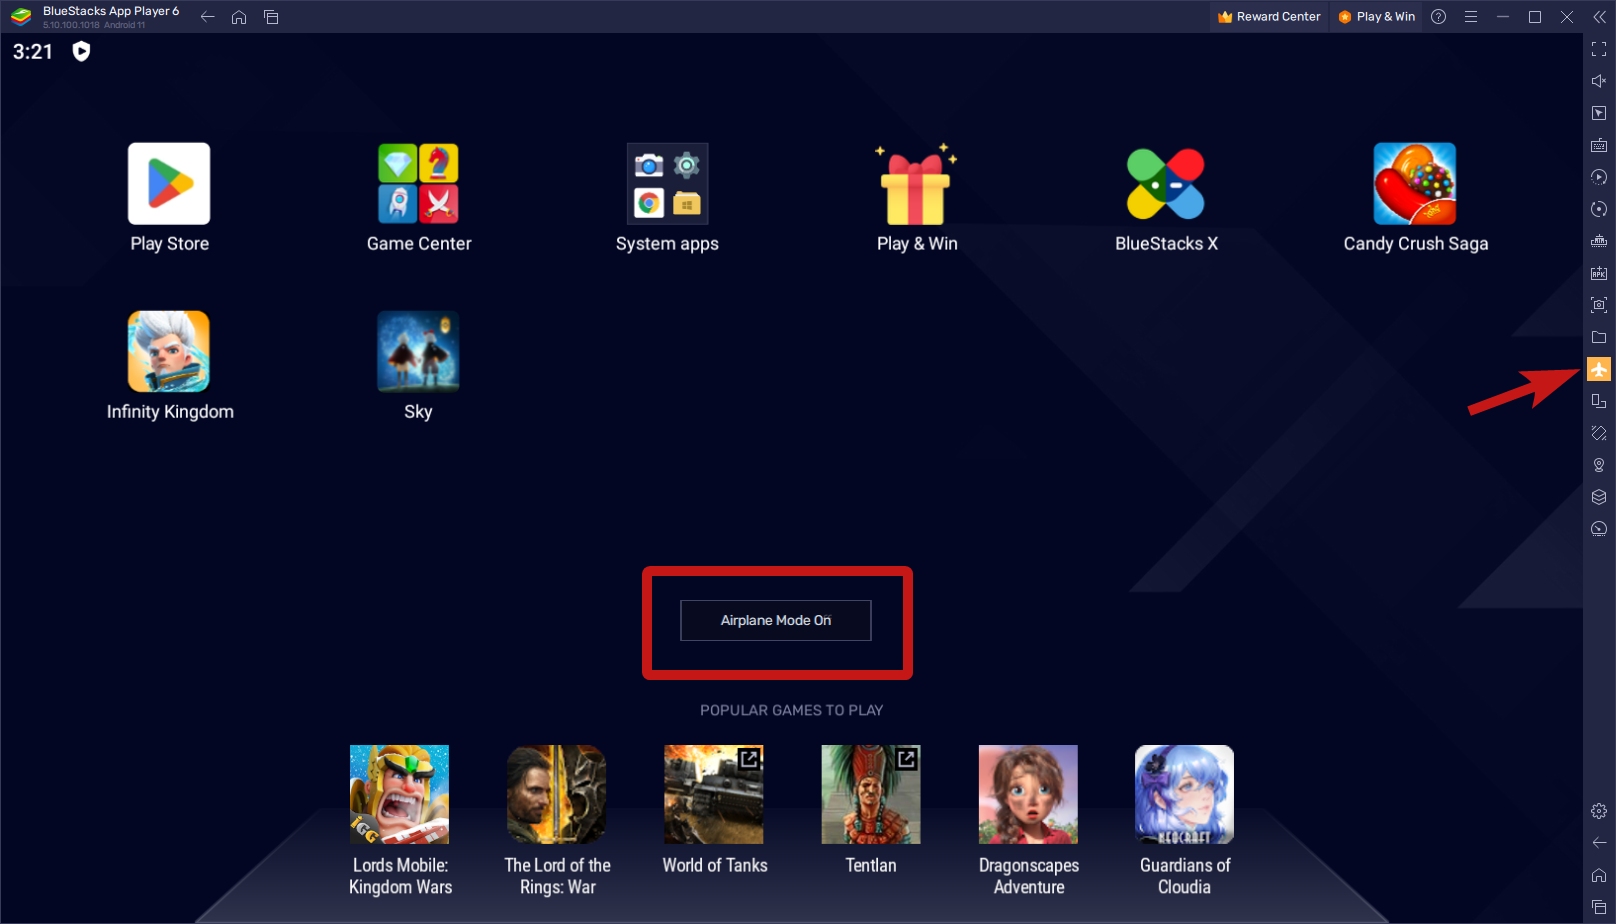 BlueStacks ‘Airplane Mode’ is Here To Give an Uninterrupted Mobile Gaming Experience